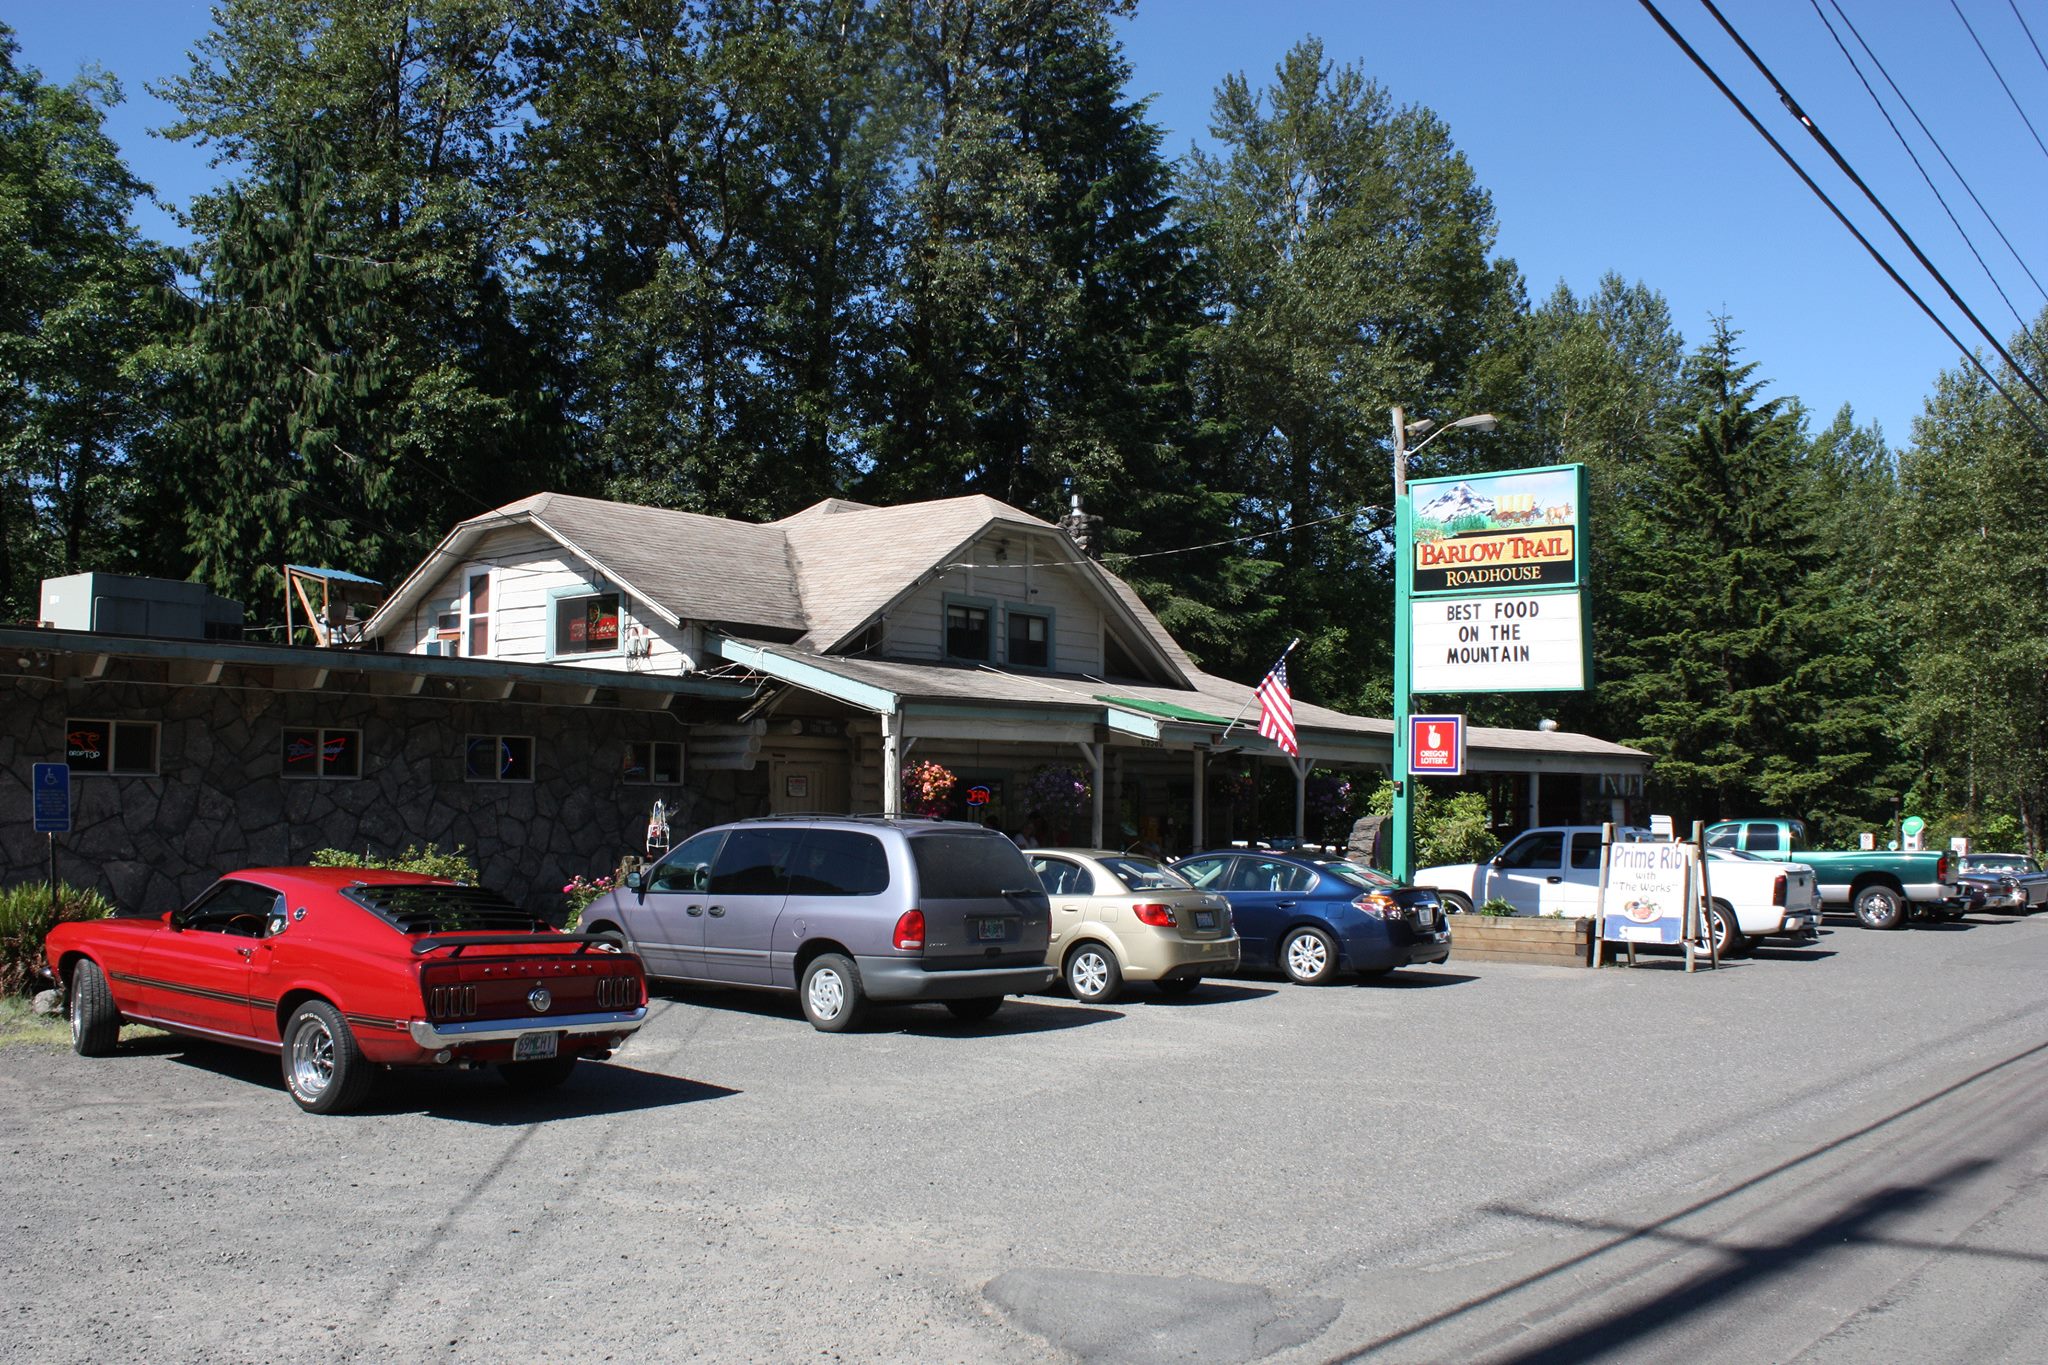 This Mt. Hood Oregon Restaurant Has The Best Food On The Mountain